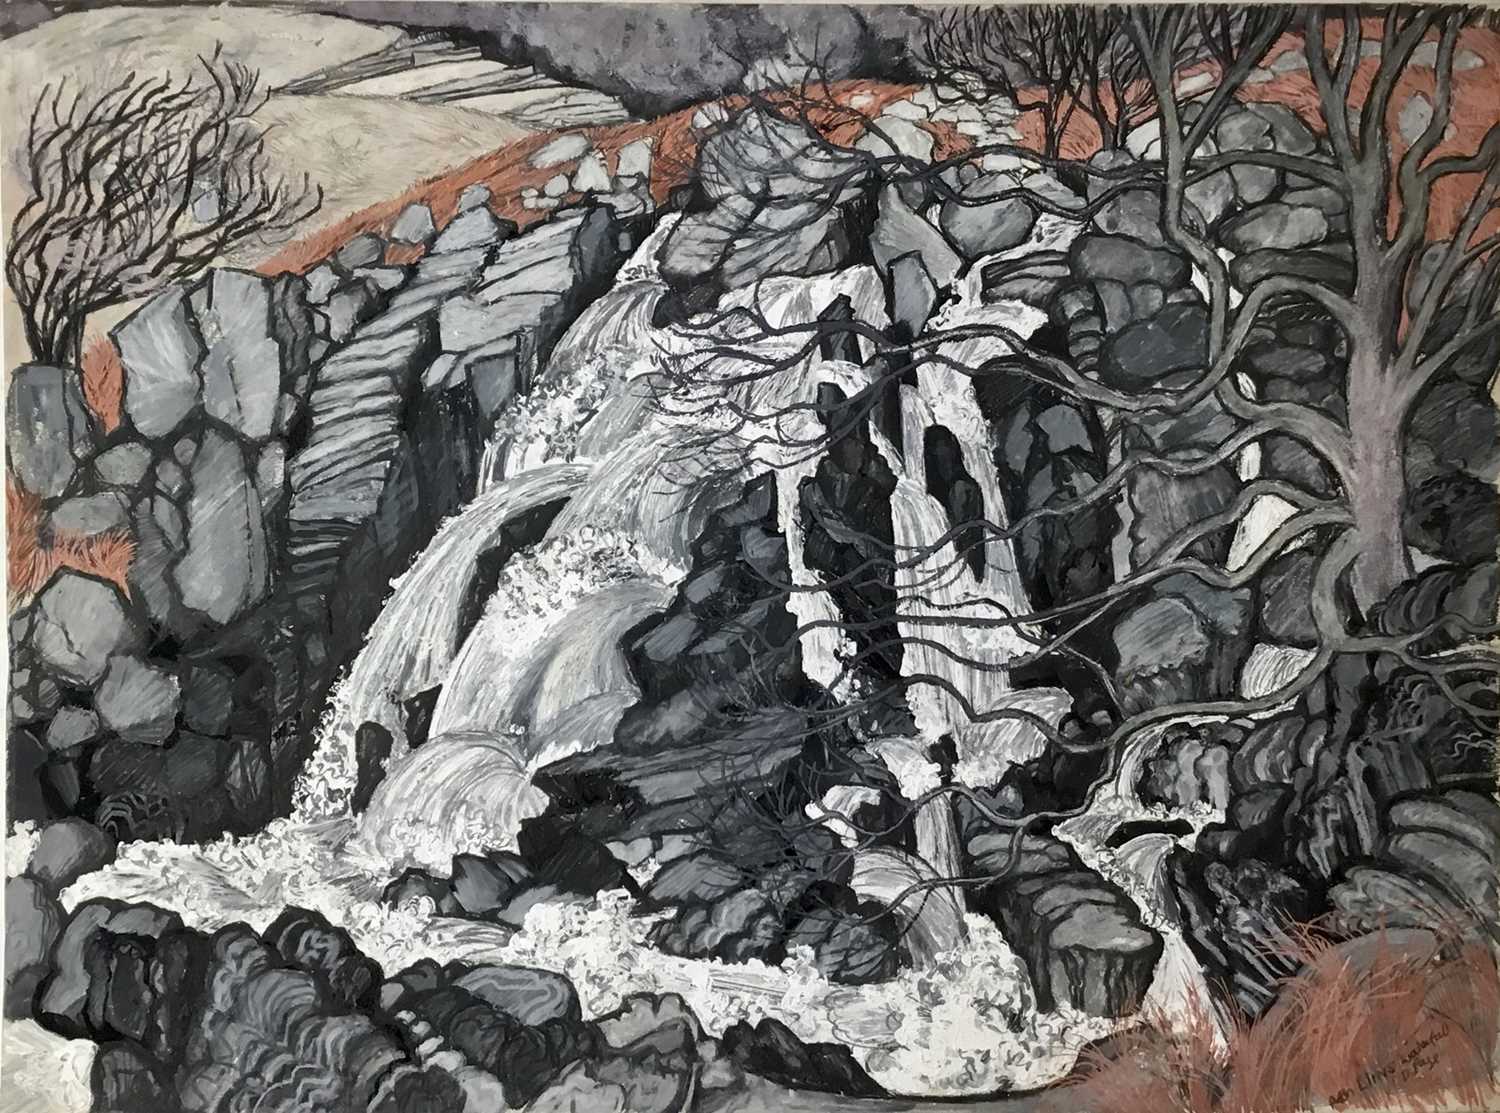 Lot 24 - *Dione Page (1936-2021) gouache and pastel on paper laid on card - ‘Afon Lliw falls’, signed and titled, unframed